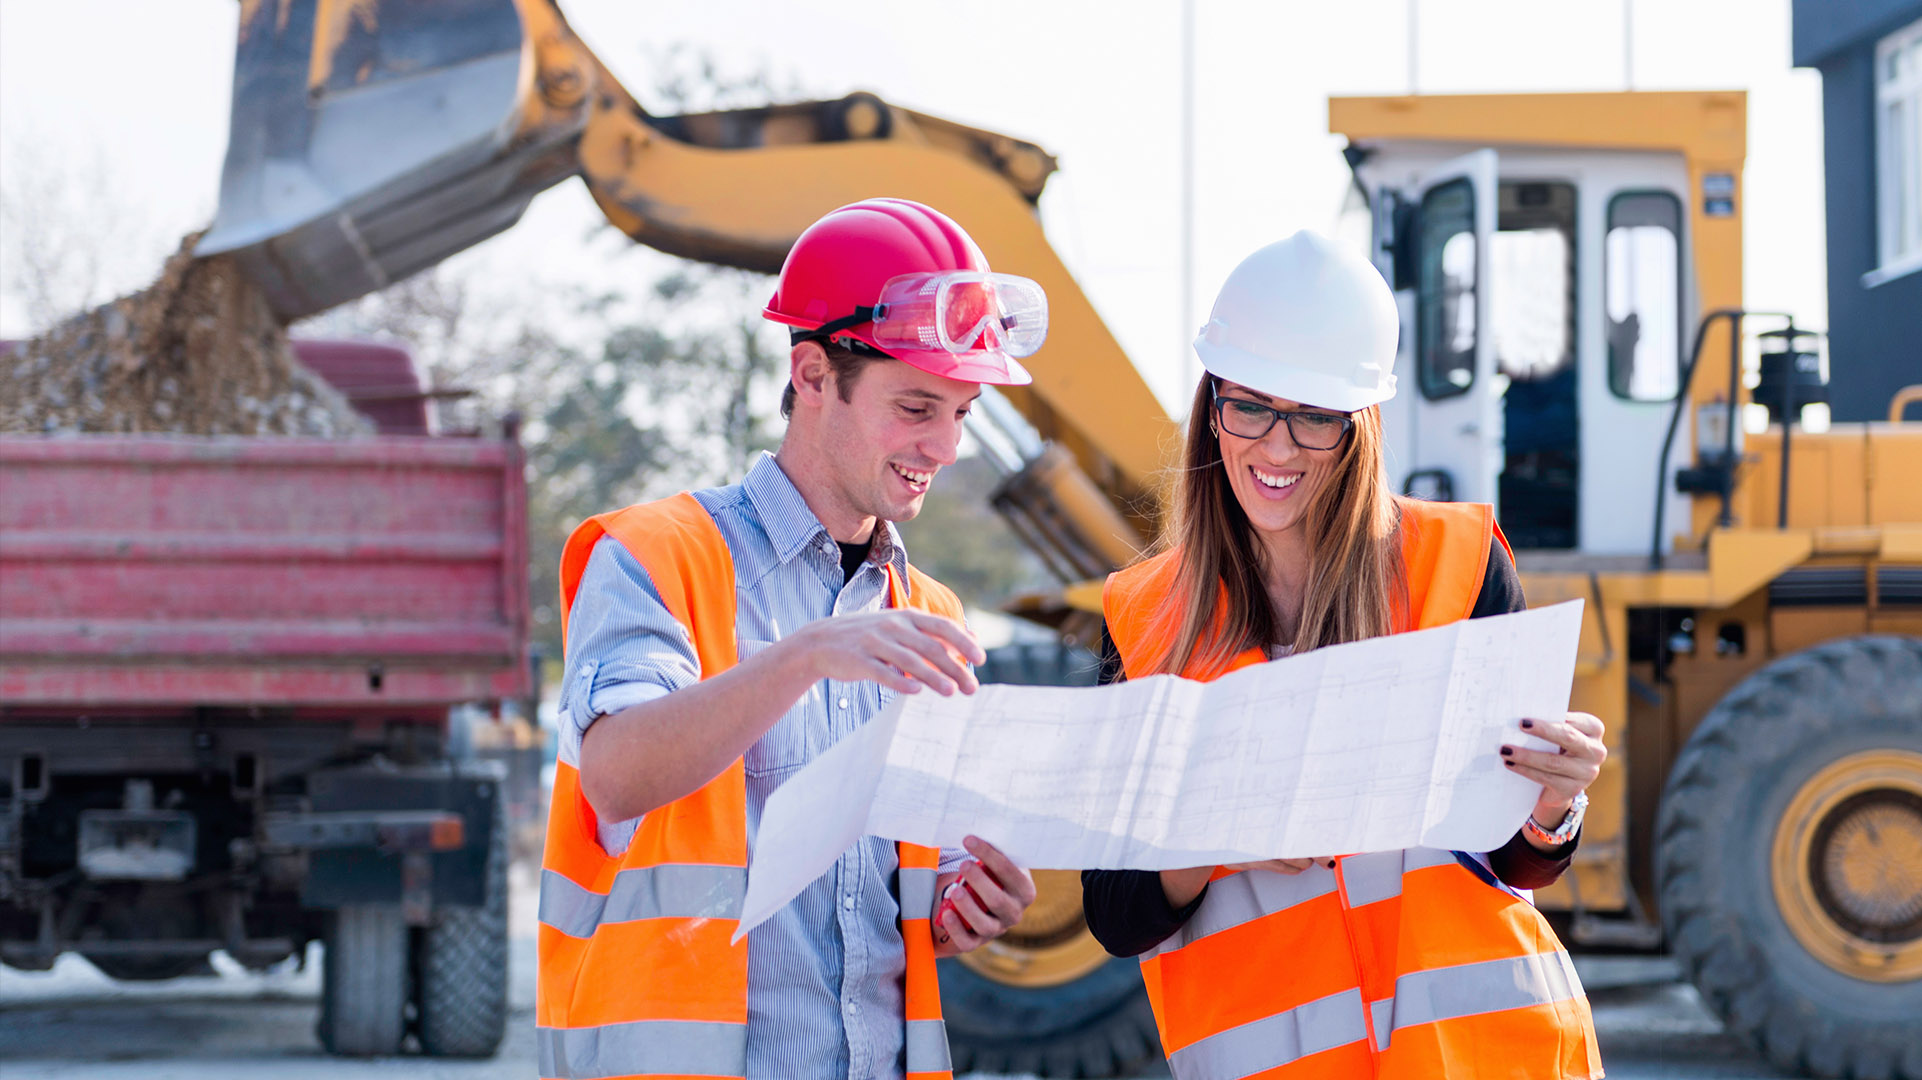 Two Civil Engineering students examining blueprints at a buildin site